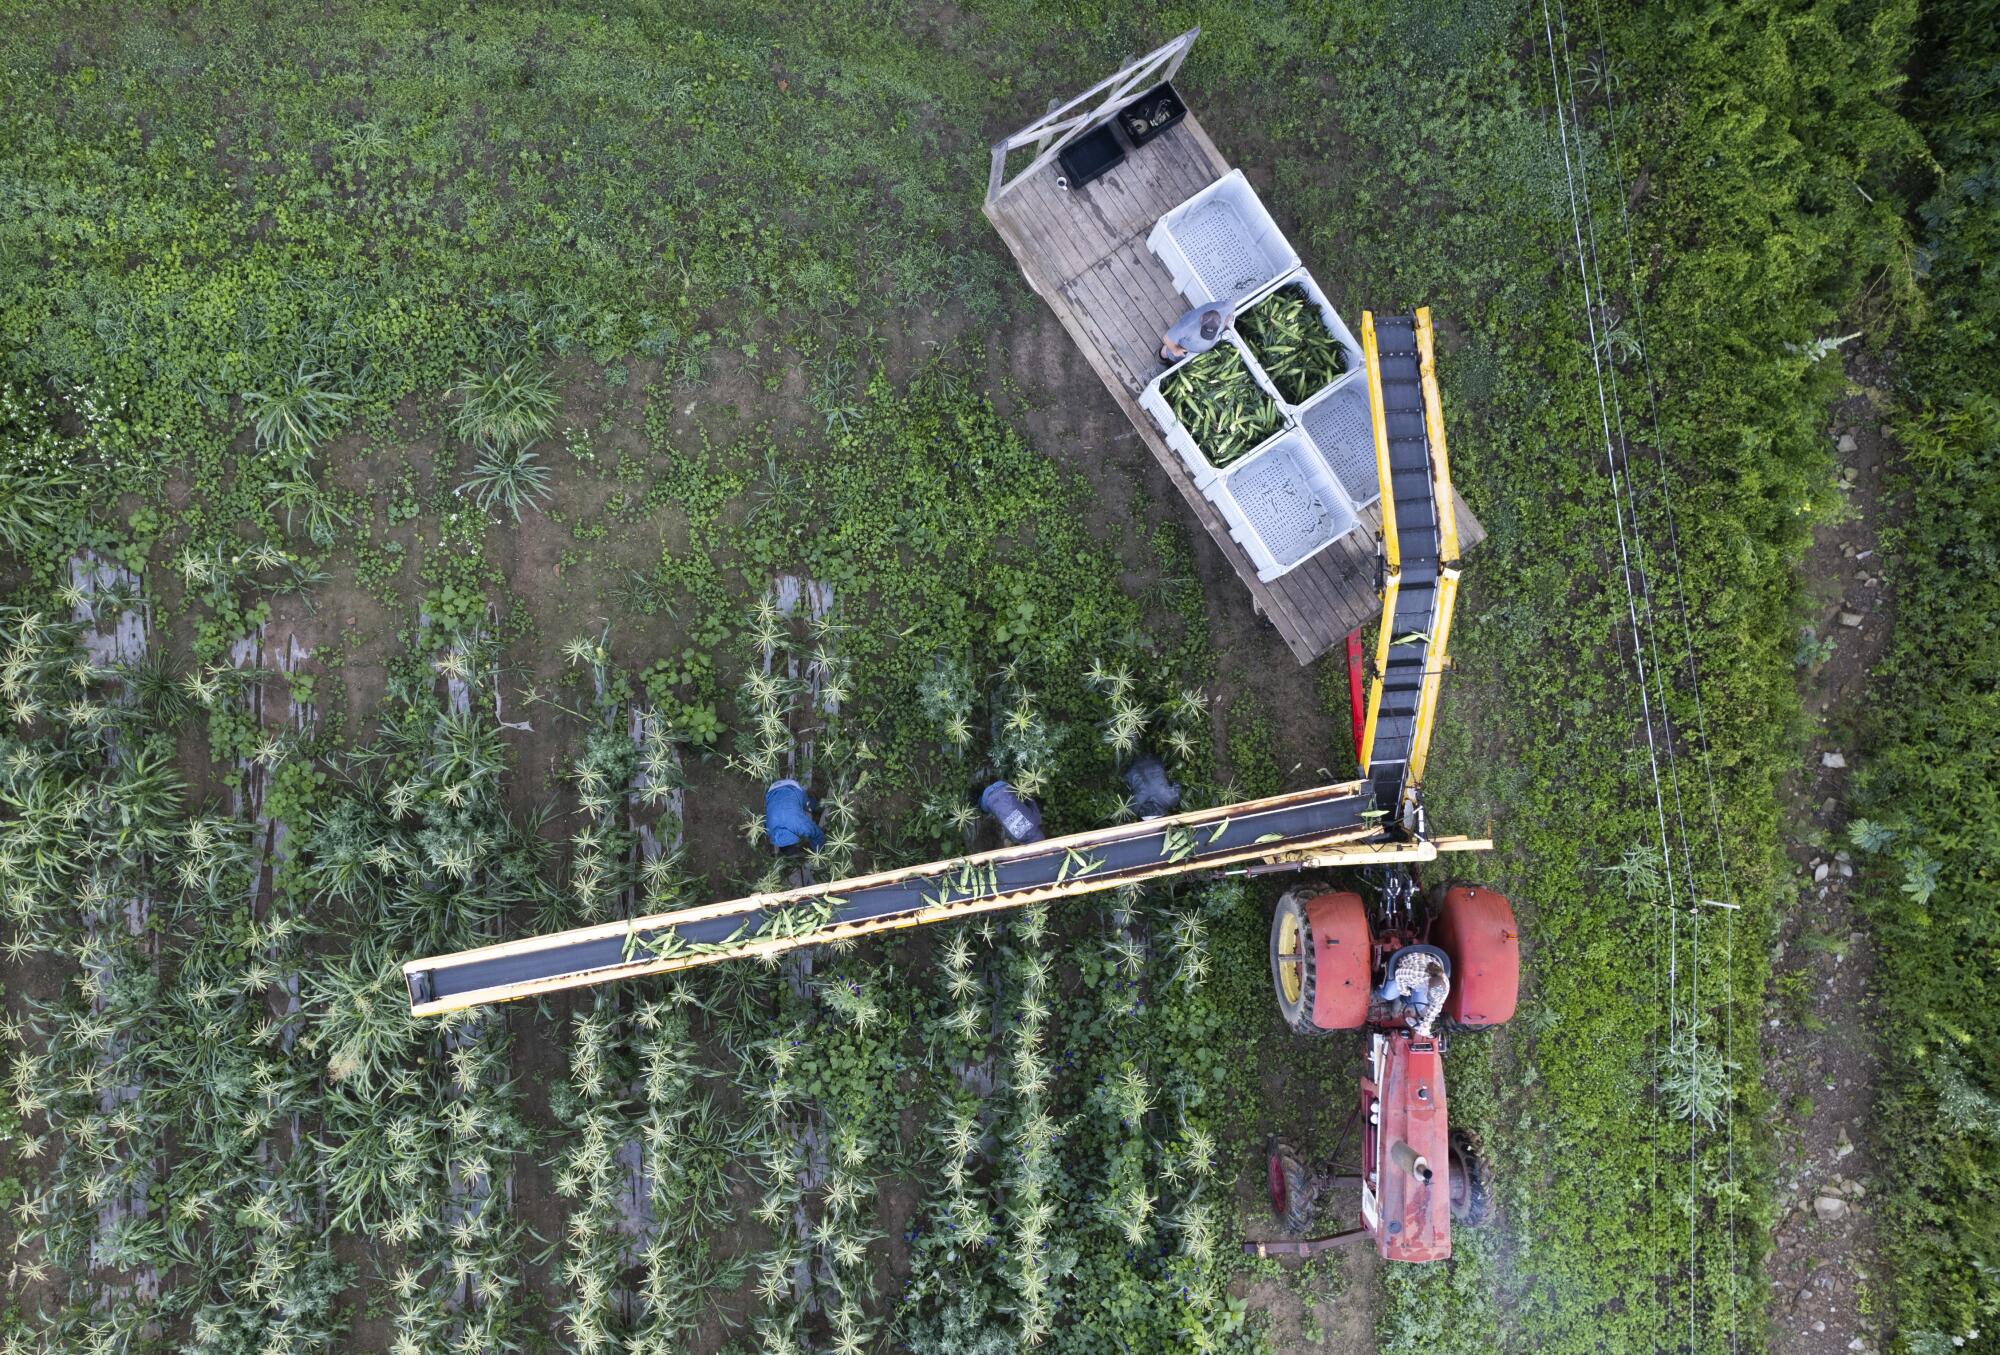 An aerial view shows farmworkers and harvesting equipment in a cornfield.